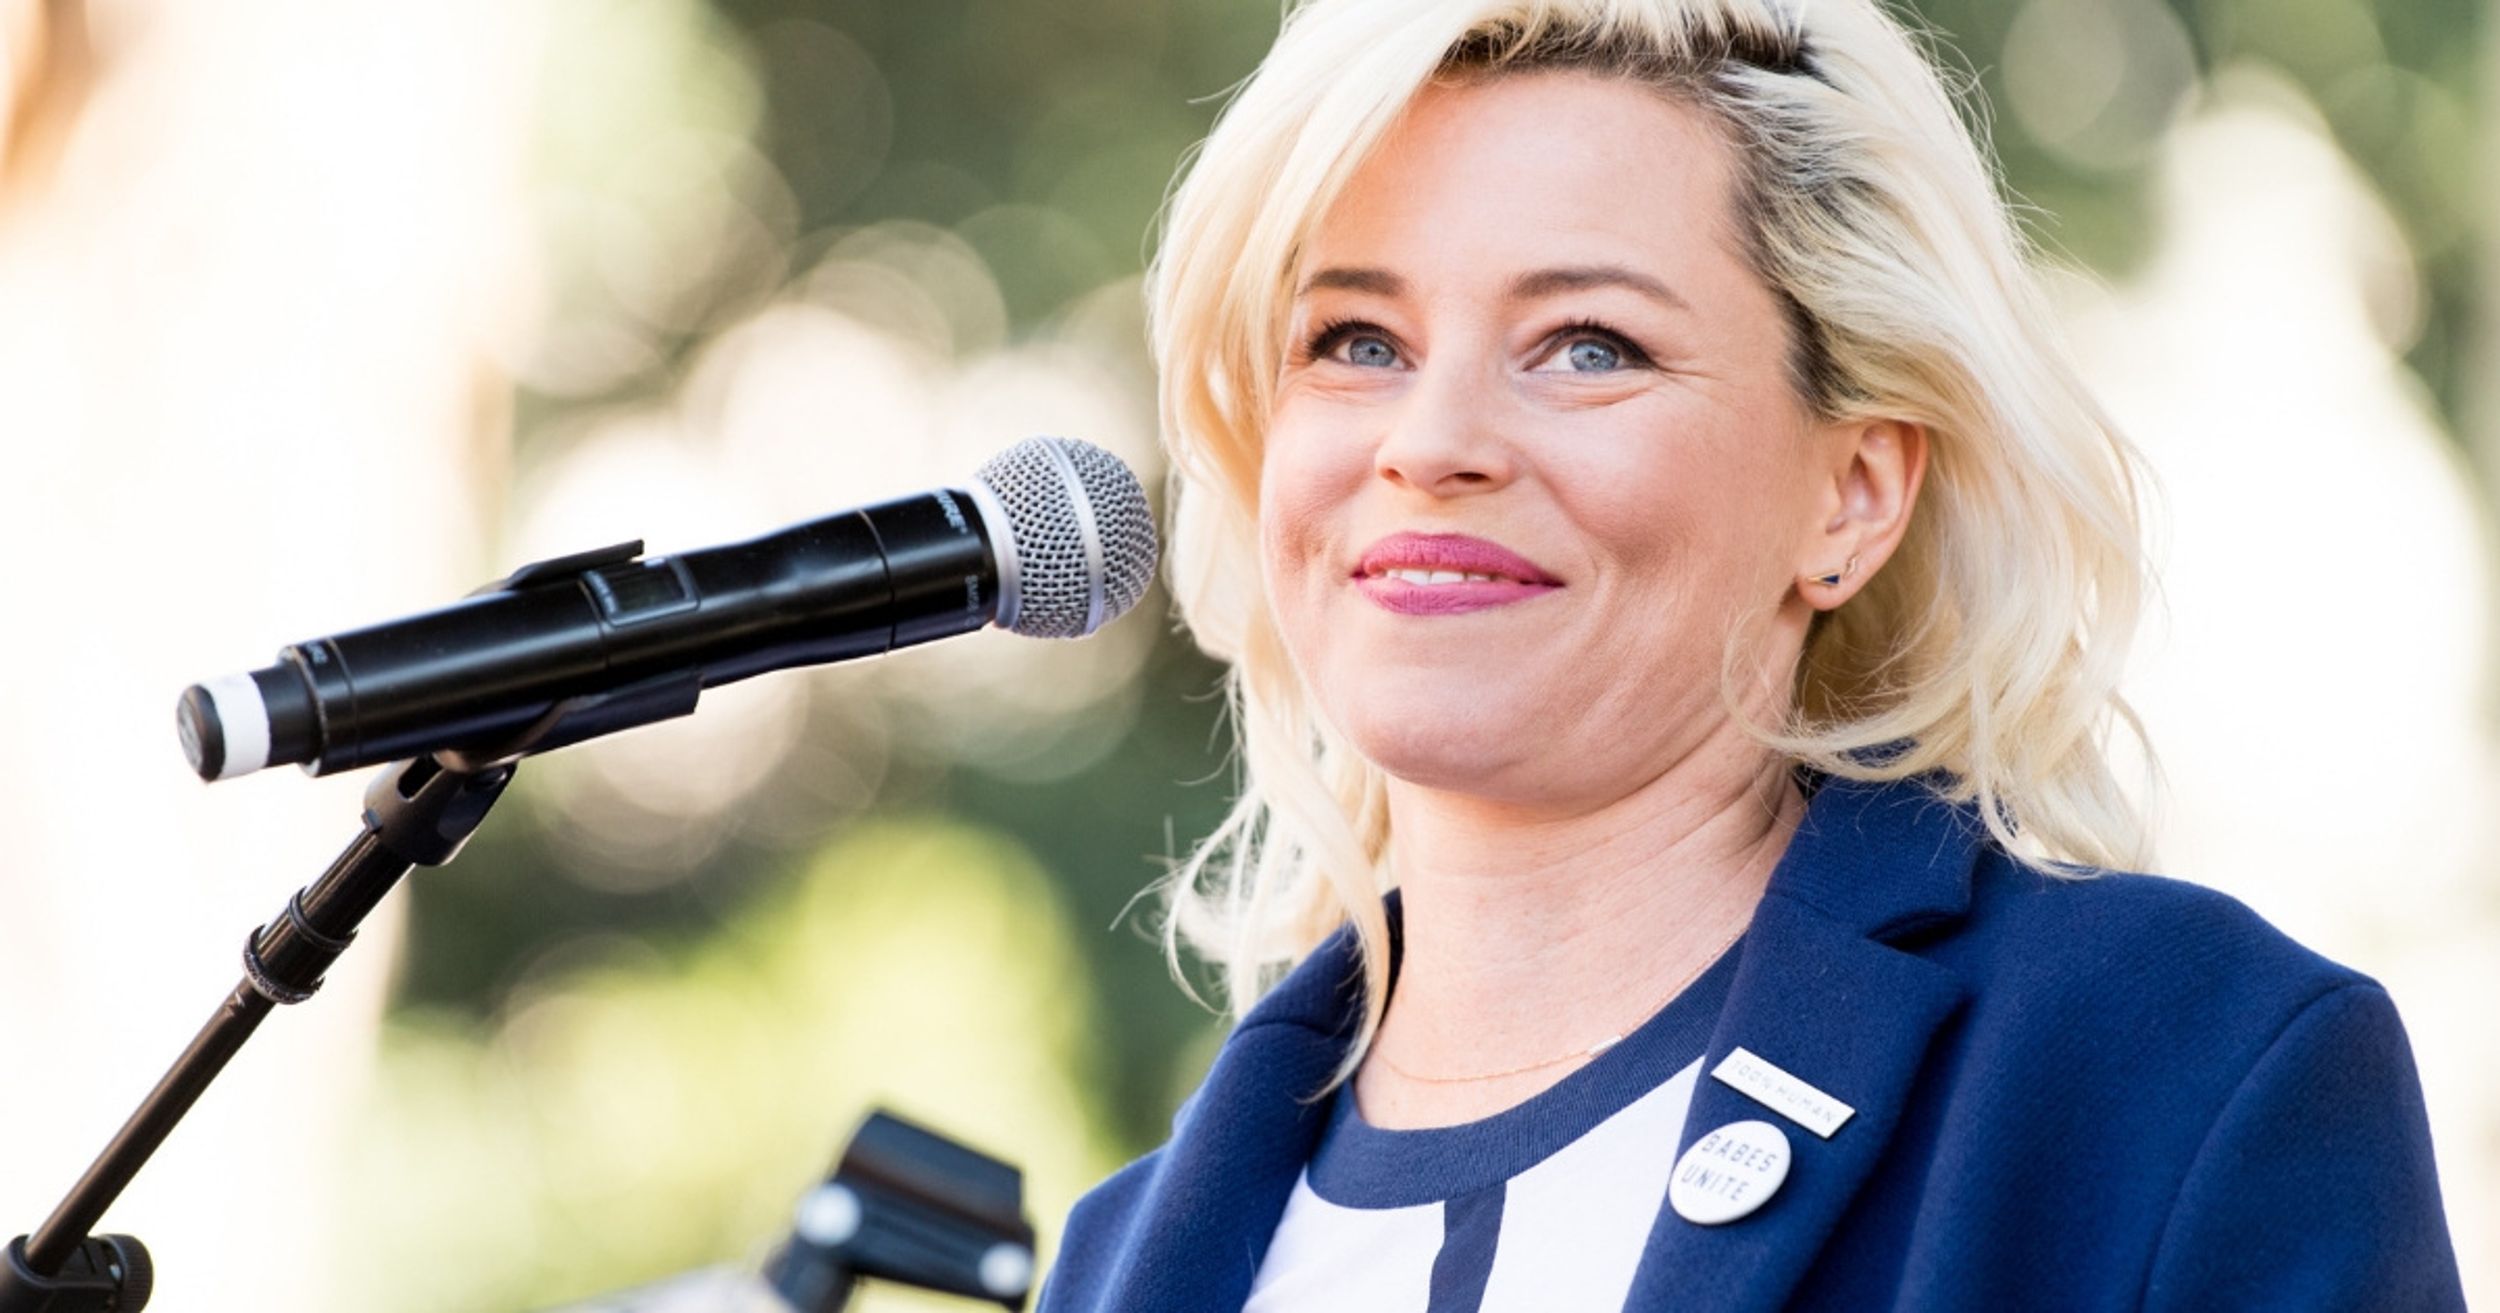 Elizabeth Banks' Keen Observation On Kavanaugh Hearing And The Treatment Of Women Is Resonating With Many